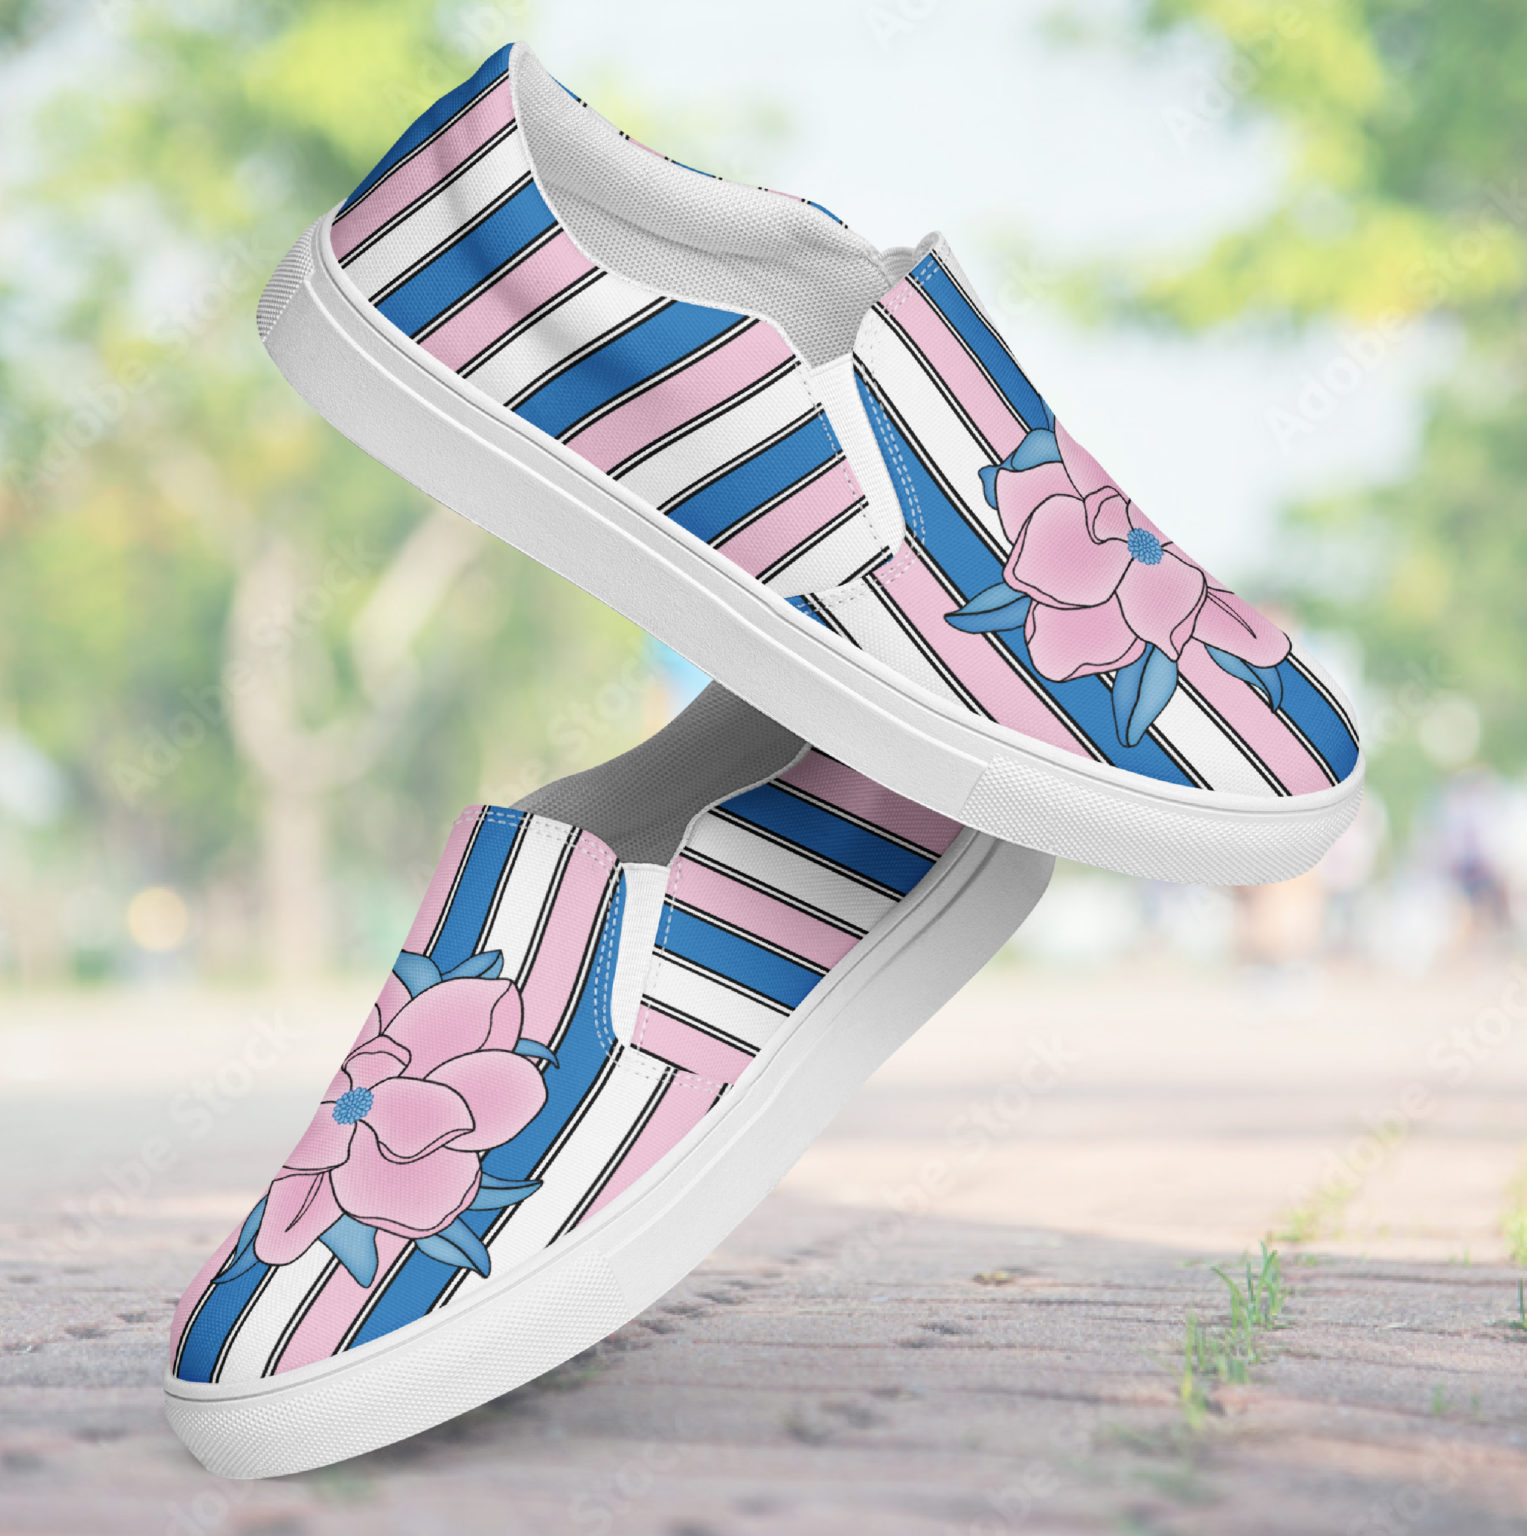 Canvas Slip-on Shoes